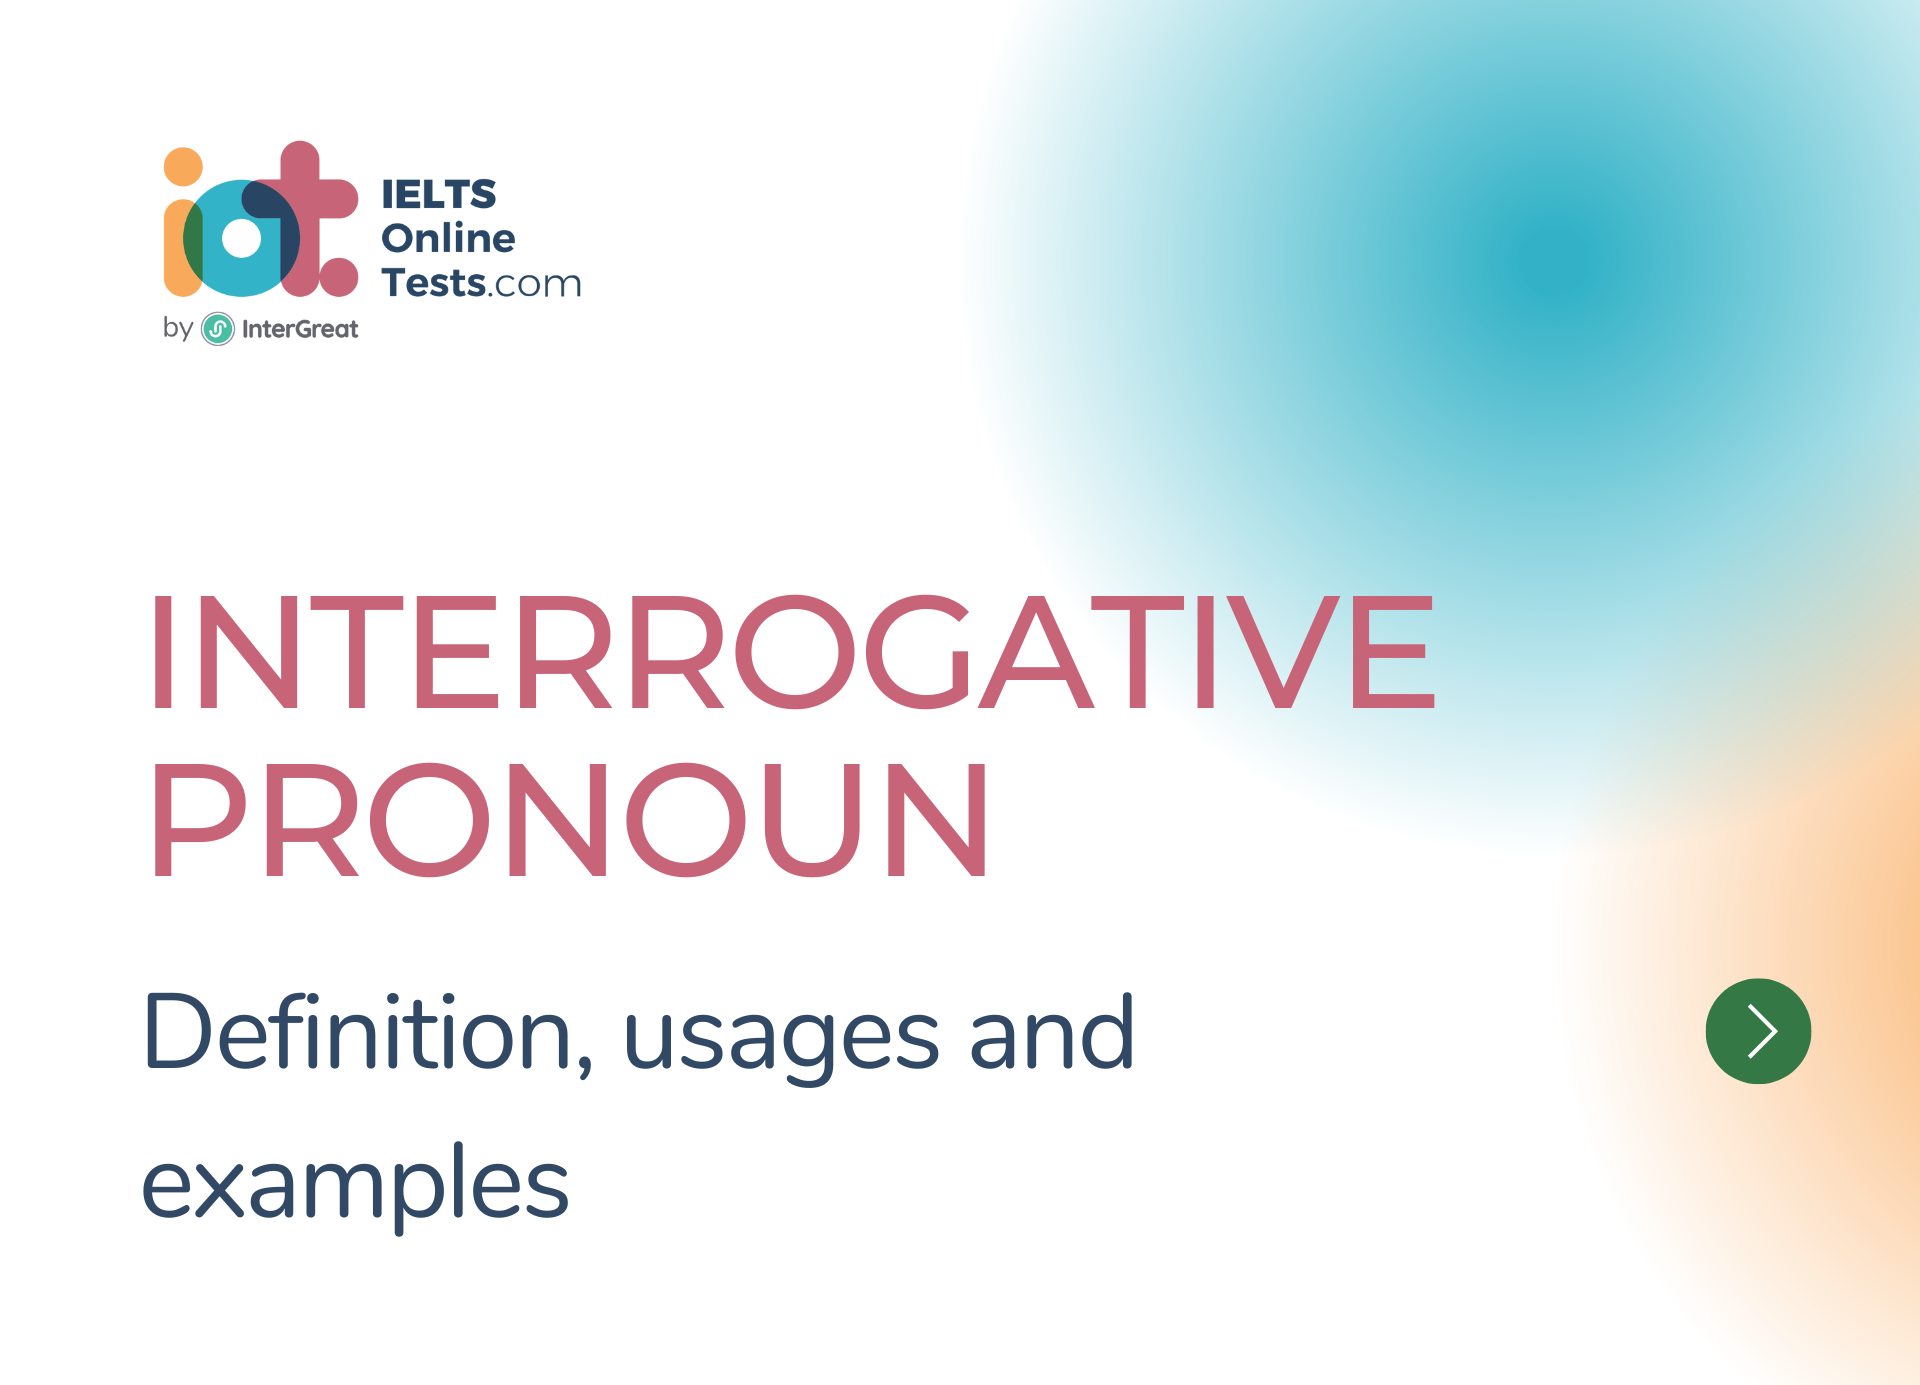 Interrogative pronoun definition, types and examples